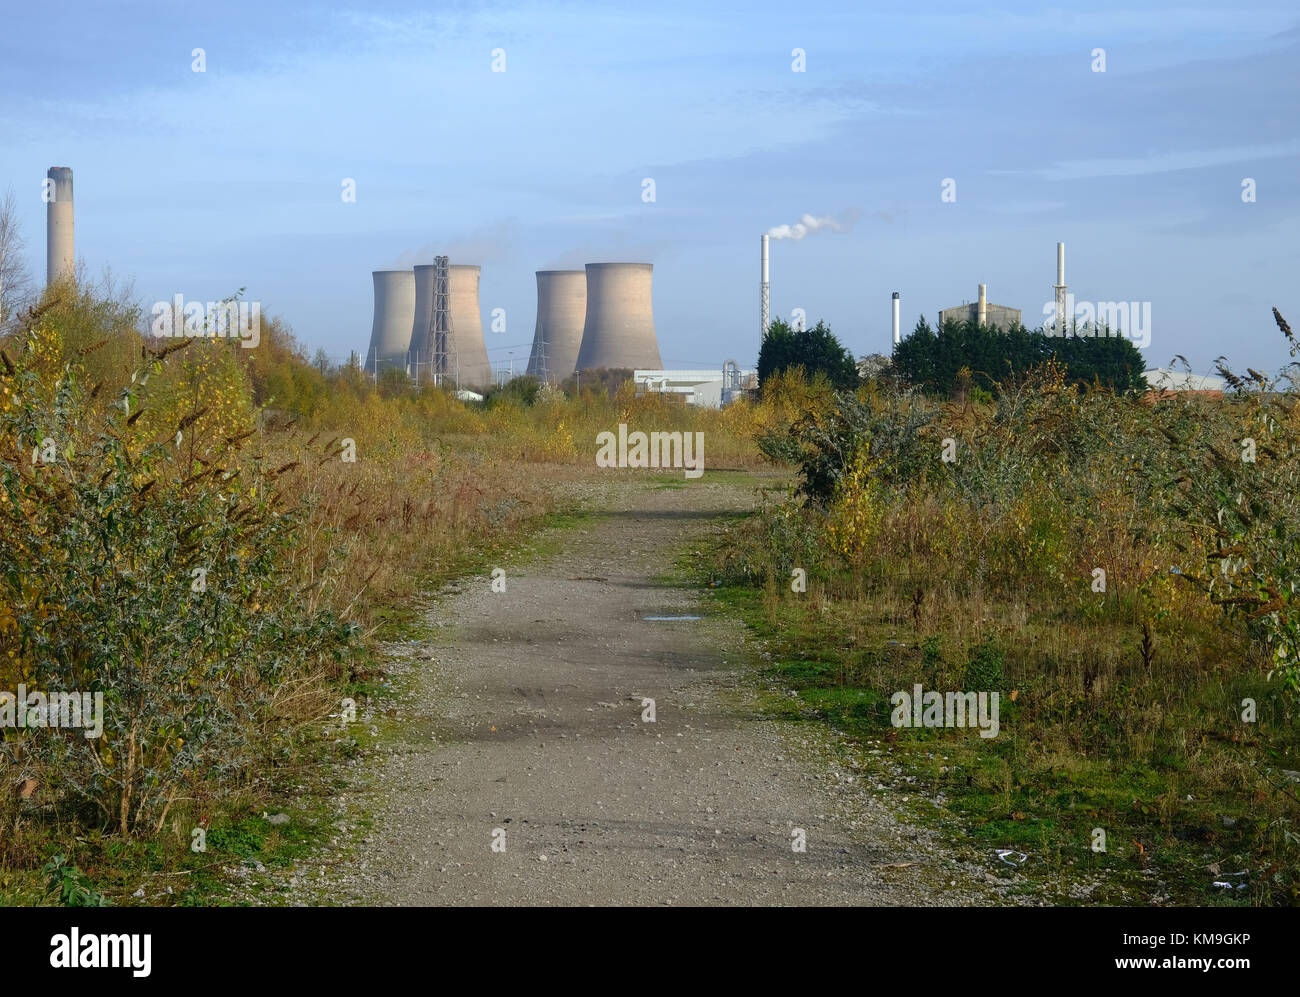 Fiddlers Ferry power station viewed across a derelict landscape Stock Photo